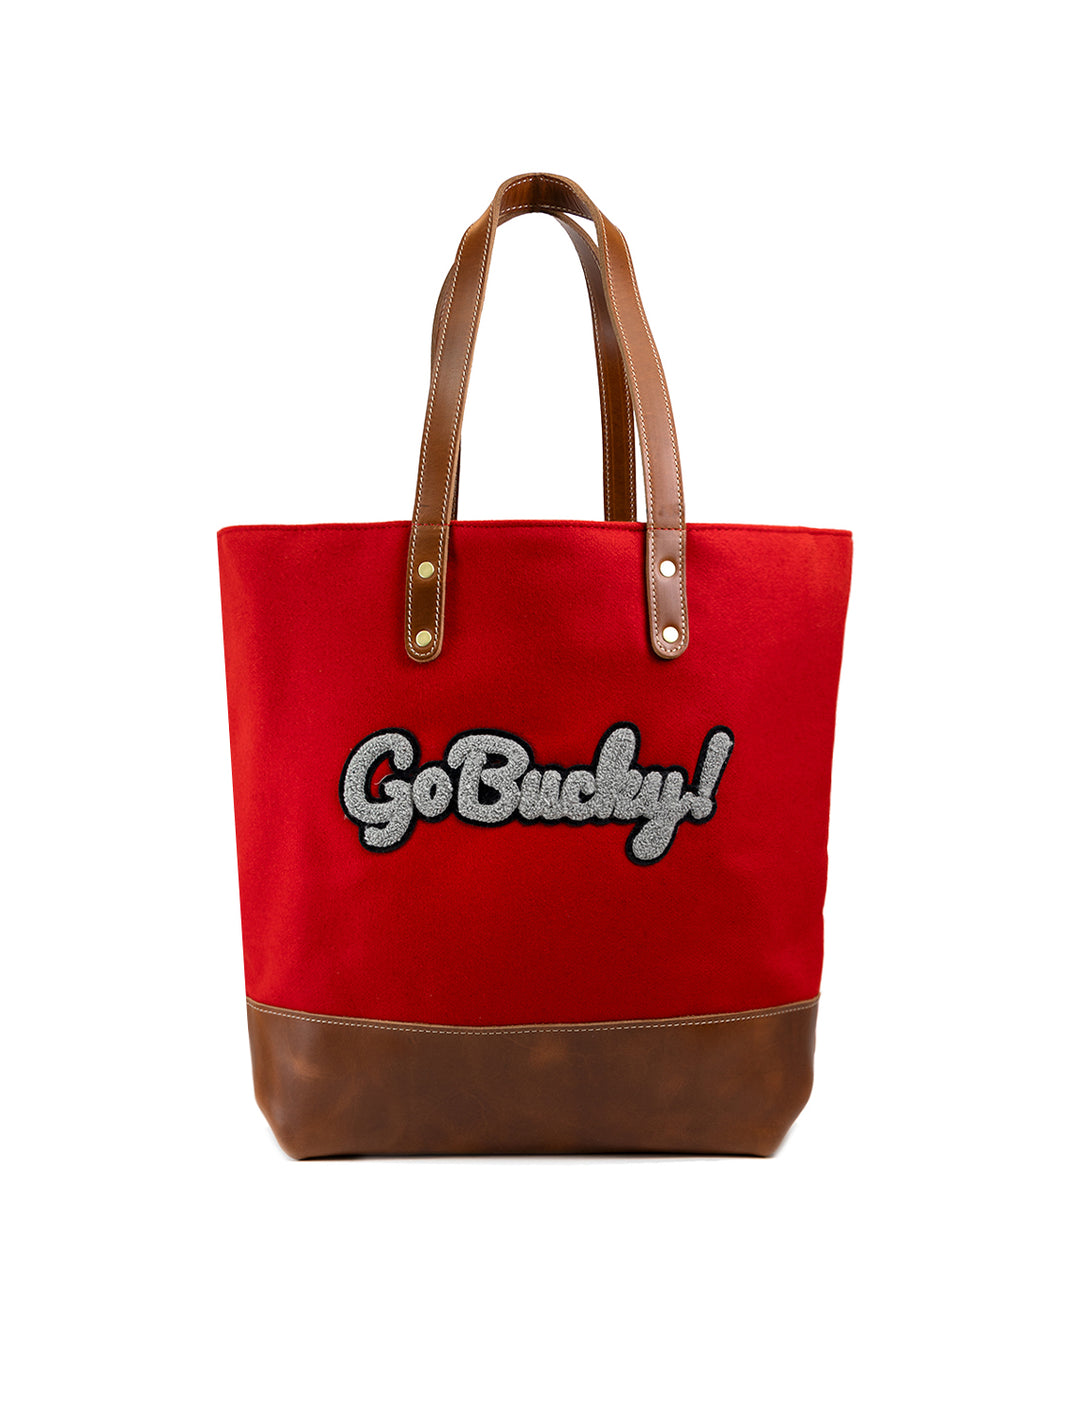 Front view of Heritage Gear's wisconsin red script go bucky tote bag.